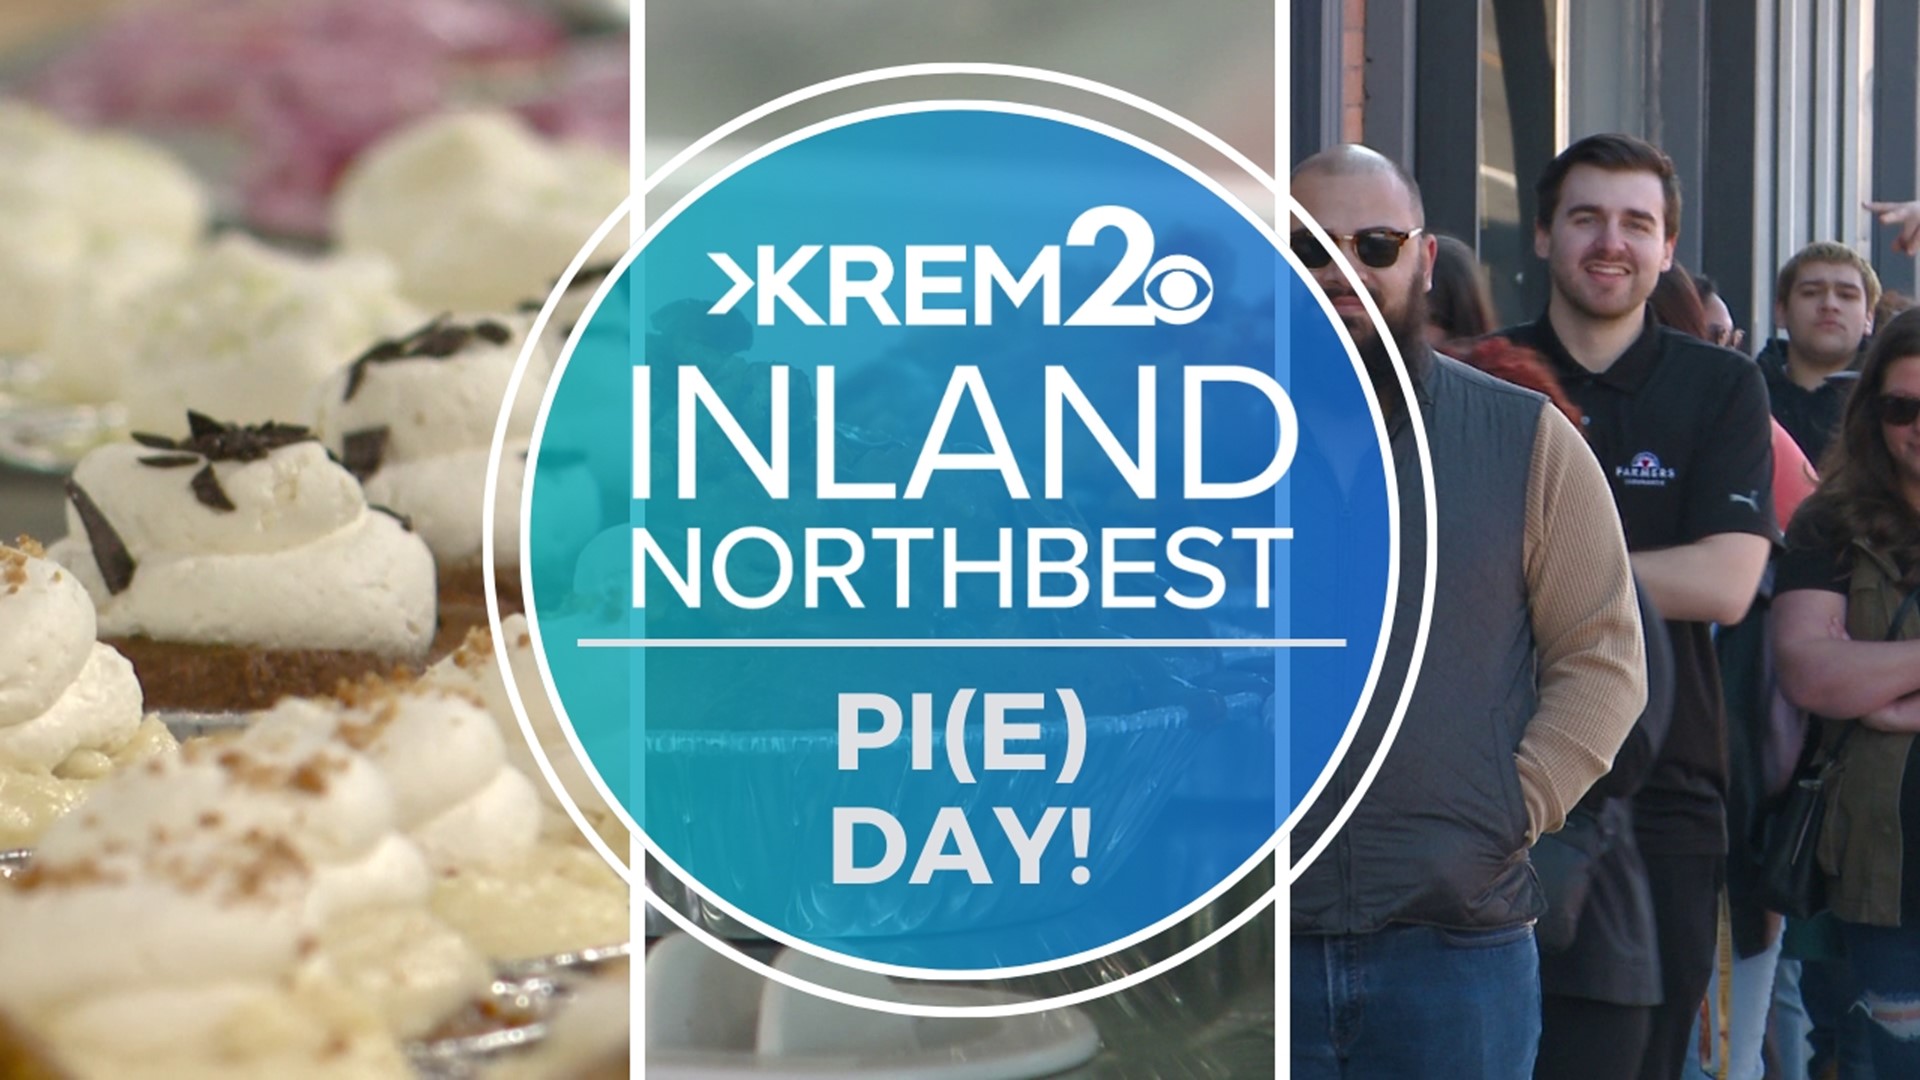 Spokane residents lined up for blocks to get a pie from Birdie's Pie Shop on Pi Day!